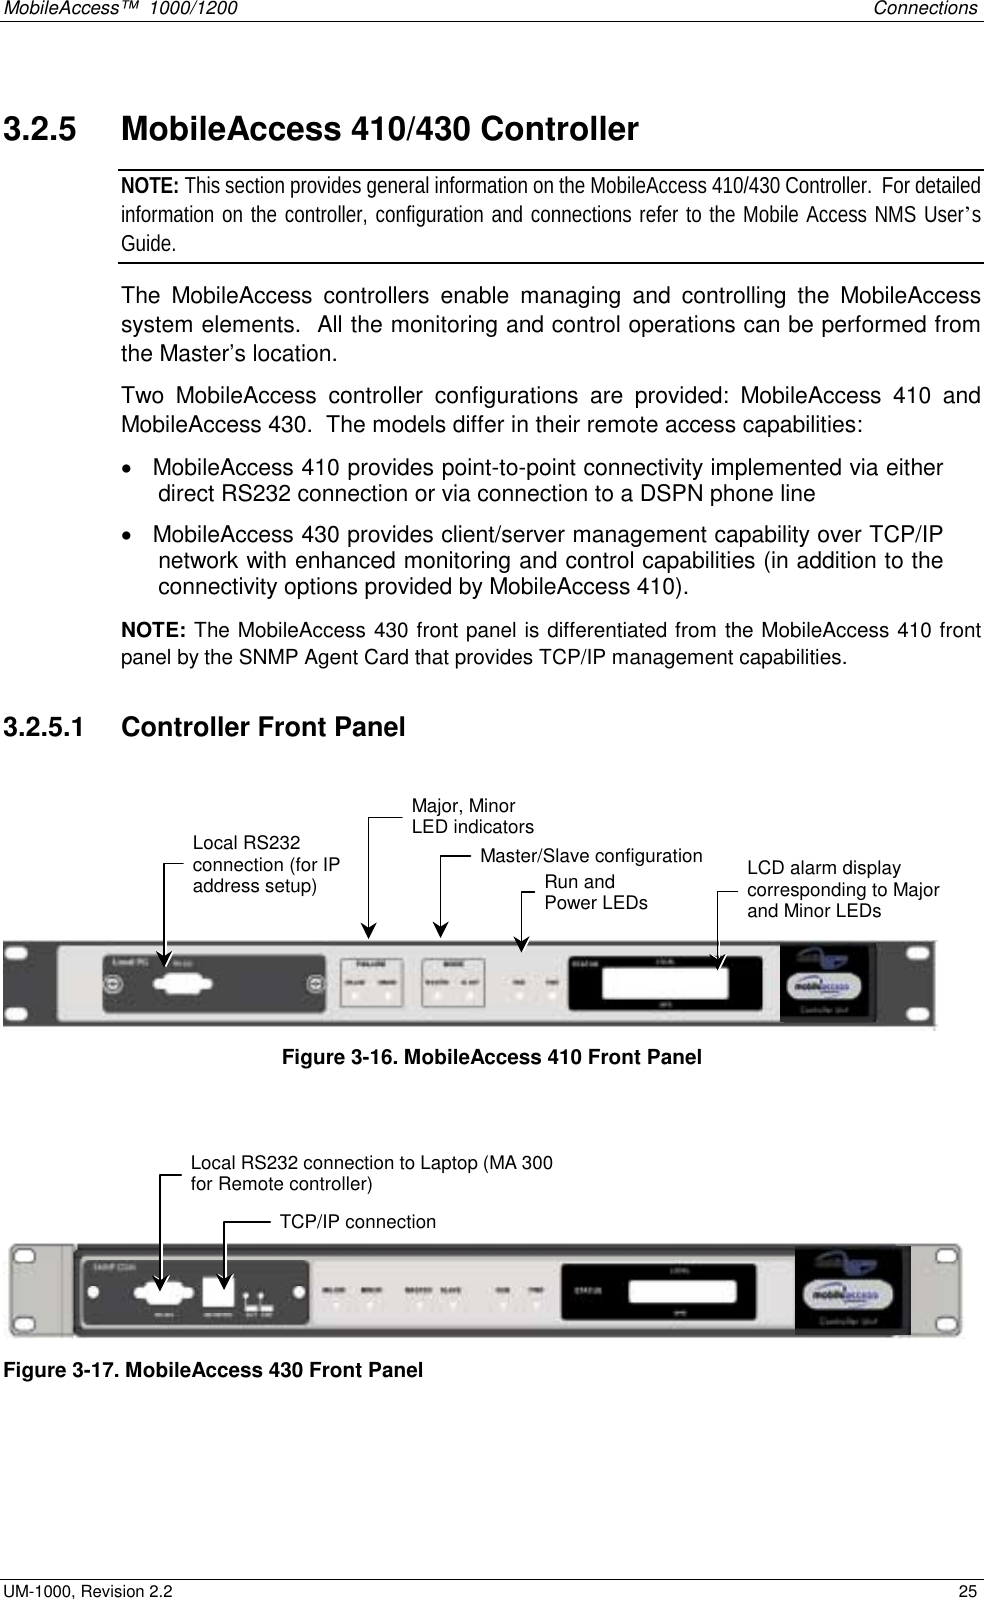 MobileAccess™  1000/1200    Connections  UM-1000, Revision 2.2    25 3.2.5   MobileAccess 410/430 Controller NOTE: This section provides general information on the MobileAccess 410/430 Controller.  For detailed information on the controller, configuration and connections refer to the Mobile Access NMS User’s Guide. The MobileAccess controllers enable managing and controlling the MobileAccess system elements.  All the monitoring and control operations can be performed from the Master’s location.  Two MobileAccess controller configurations are provided: MobileAccess 410 and MobileAccess 430.  The models differ in their remote access capabilities: •  MobileAccess 410 provides point-to-point connectivity implemented via either direct RS232 connection or via connection to a DSPN phone line •  MobileAccess 430 provides client/server management capability over TCP/IP network with enhanced monitoring and control capabilities (in addition to the connectivity options provided by MobileAccess 410).   NOTE: The MobileAccess 430 front panel is differentiated from the MobileAccess 410 front panel by the SNMP Agent Card that provides TCP/IP management capabilities.   3.2.5.1   Controller Front Panel      Figure  3-16. MobileAccess 410 Front Panel     Figure  3-17. MobileAccess 430 Front Panel  Local RS232 connection (for IP address setup)  LCD alarm display corresponding to Major and Minor LEDs  Major, Minor LED indicators Master/Slave configurationRun and  Power LEDs TCP/IP connection Local RS232 connection to Laptop (MA 300for Remote controller) 